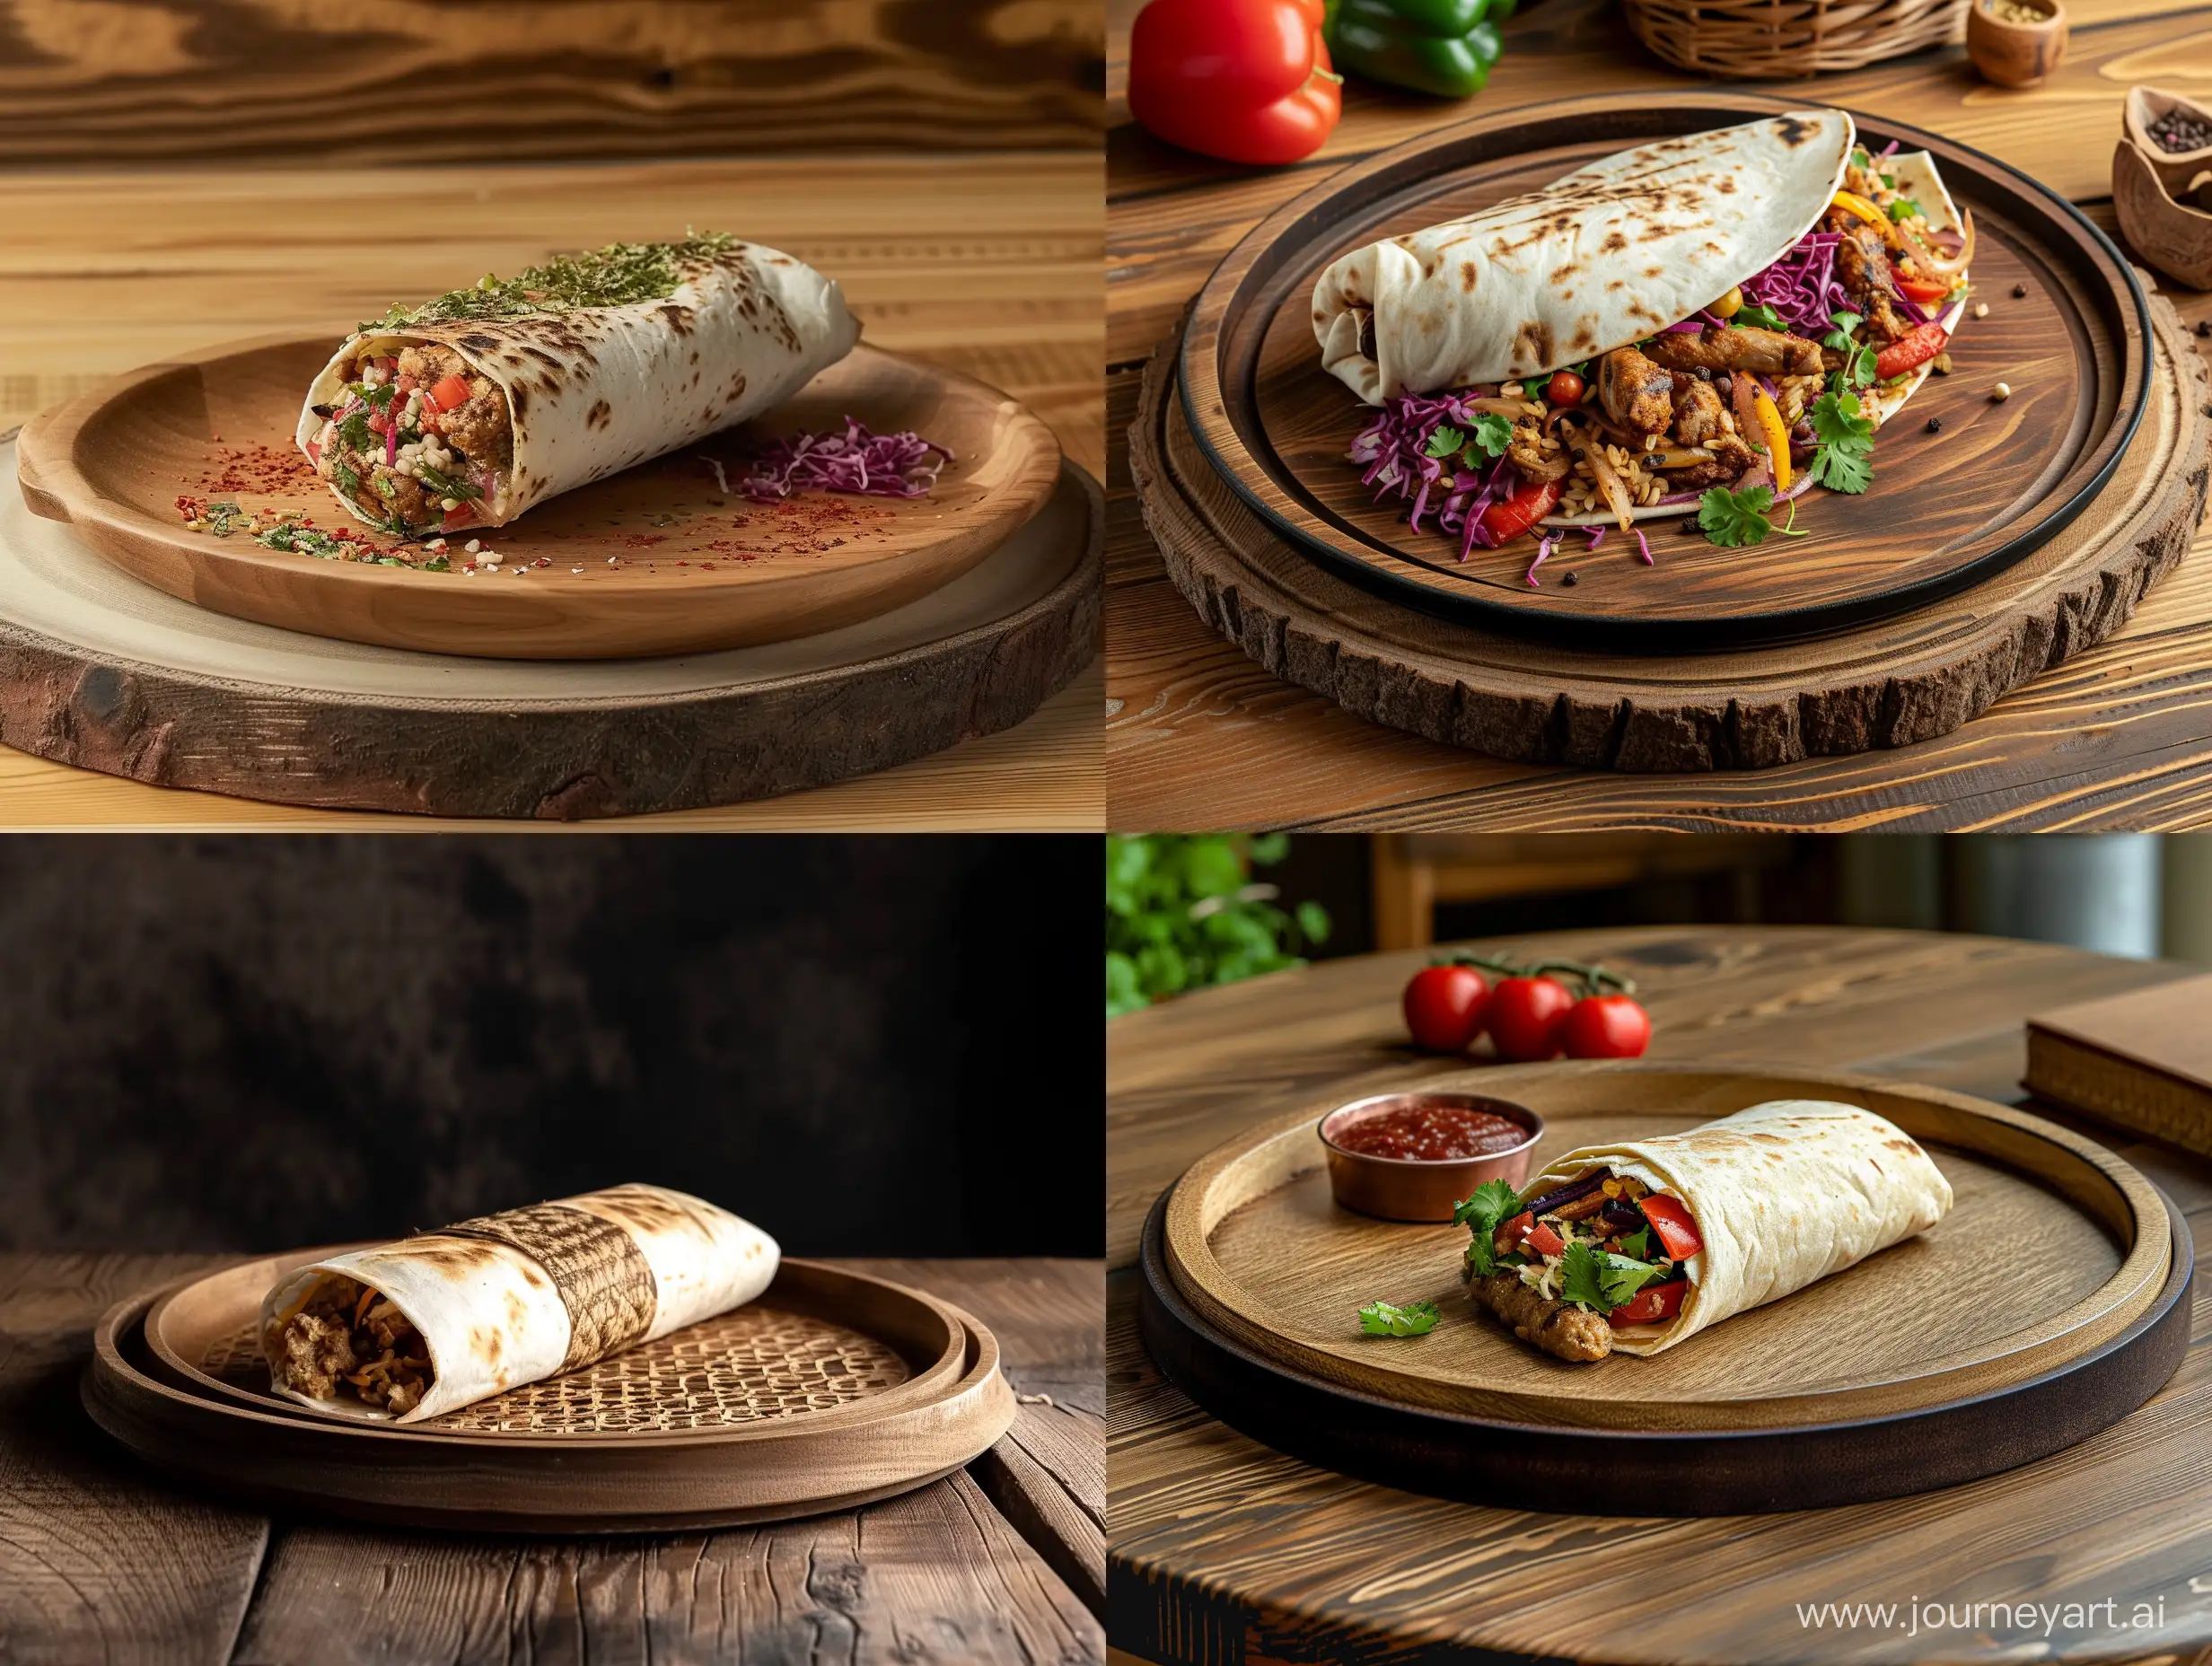 Nothing but a shawarma tray on a round oak tray on a wooden table background
, professional photography, shot with a Sony A7R IV, 4k camera